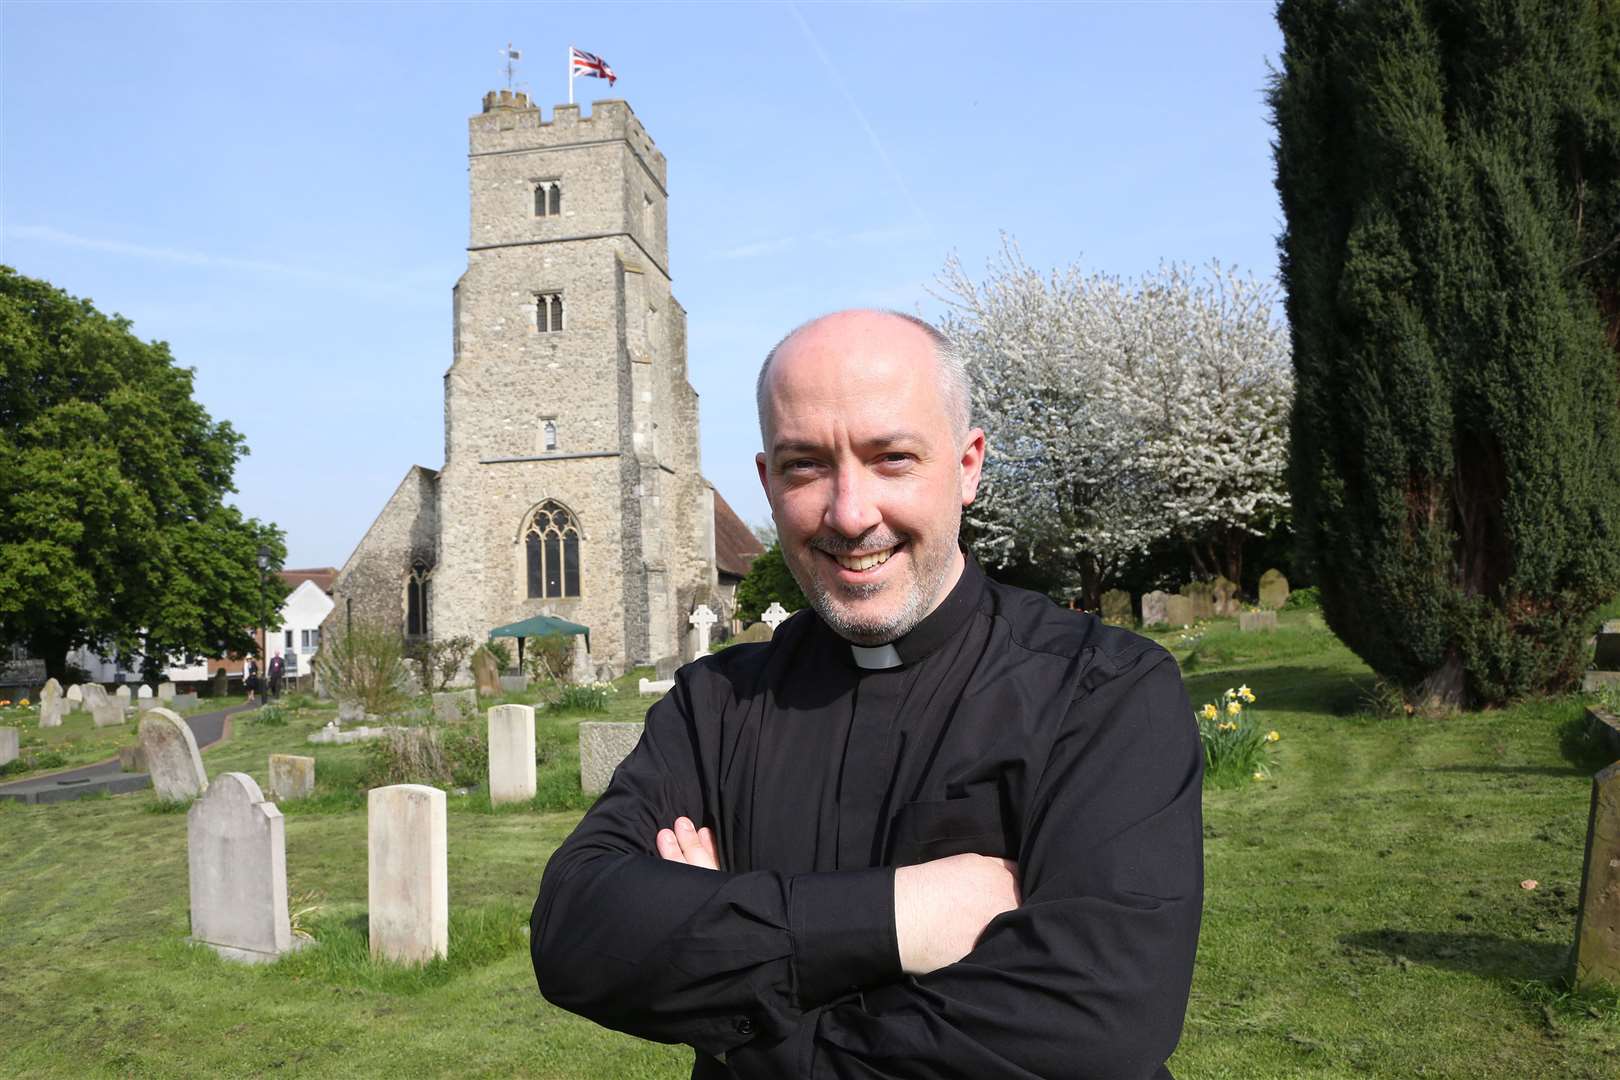 Vicar of St Margaret's in Rainham, the Rev Nathan Ward, who holds a Masters degree in Security and Risk Management has launched a campaign to reinstate CCTV cameras at the Rec